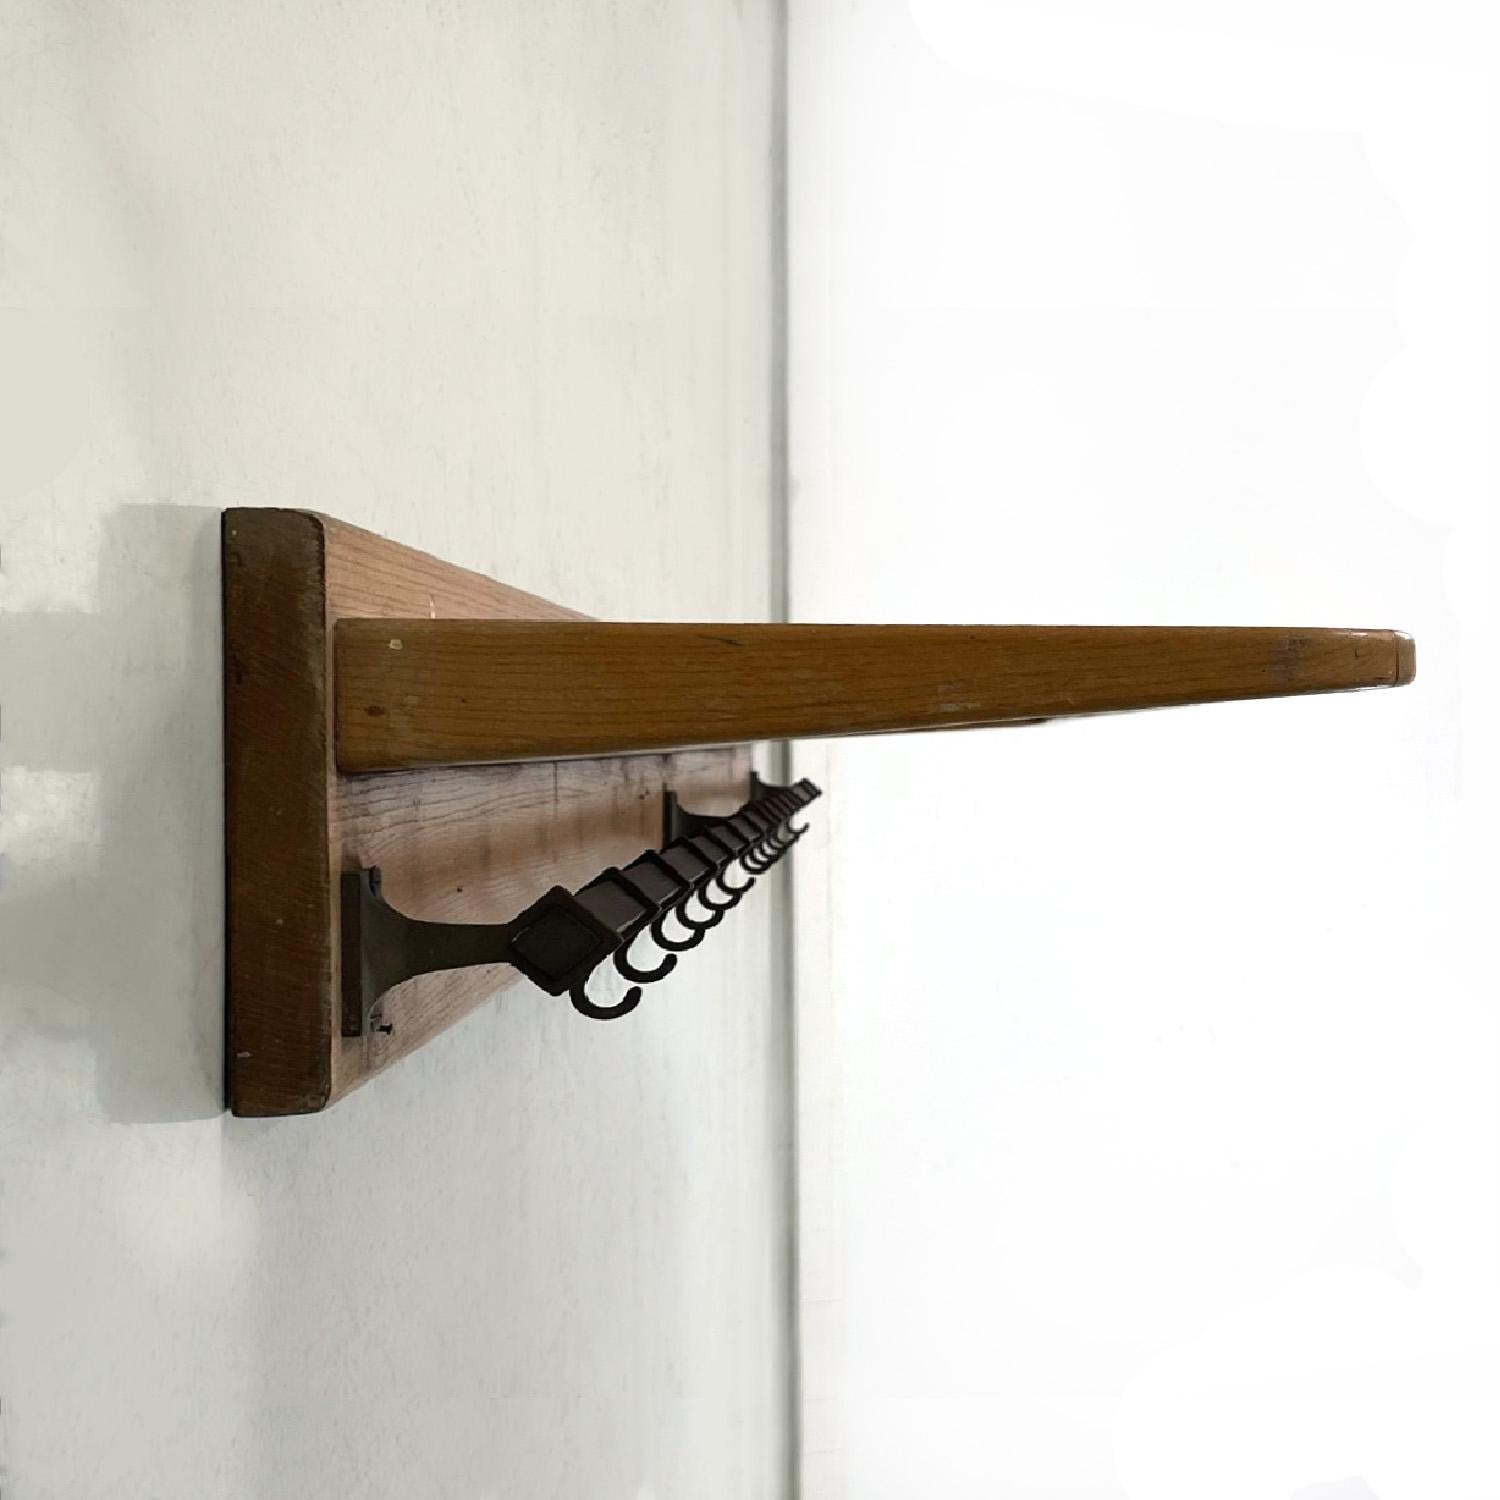 Art Deco Italian antique straw and wood wall coat hanger with metal bar 12 hooks, 1920s